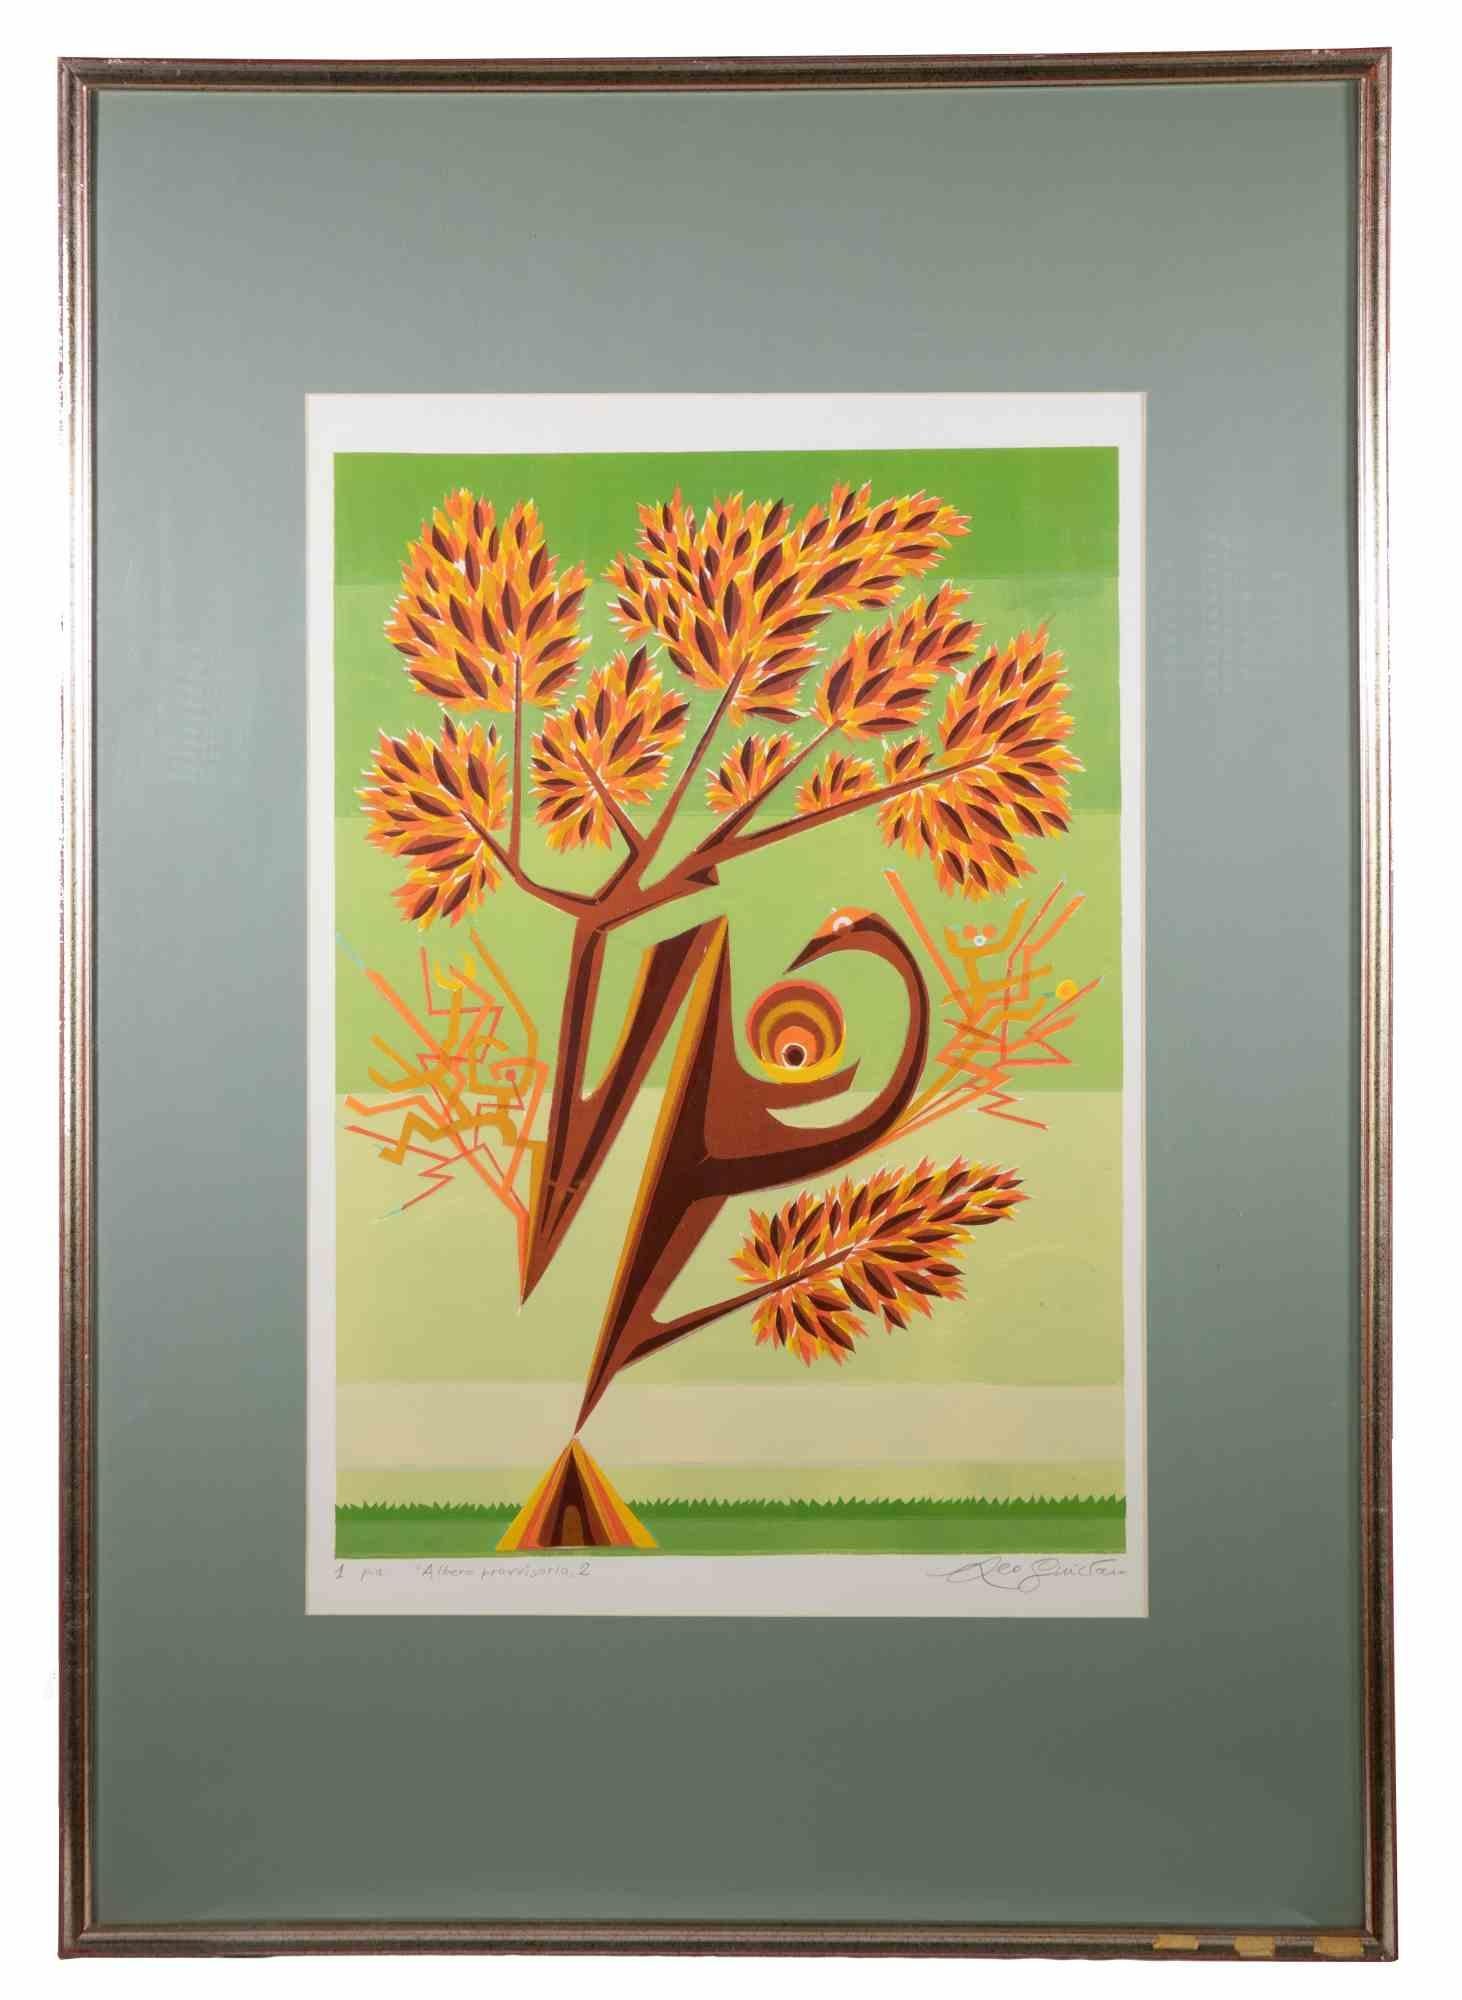  Temporary Tree 2 - Lithograph by Leo Guida - 1970s For Sale 1